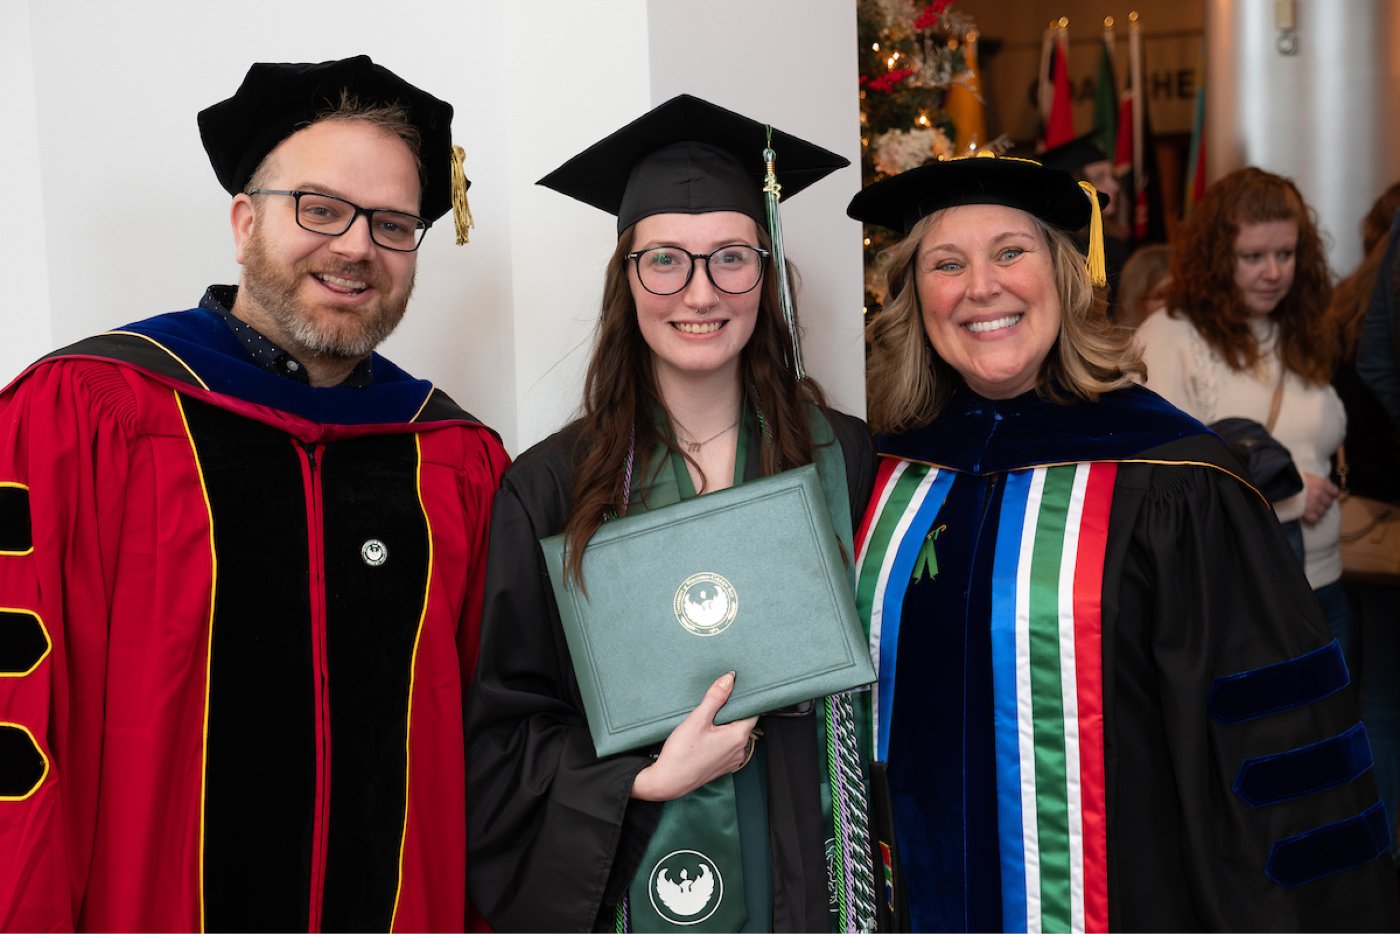 Two faculty members pose with a student and their diploma after commencement